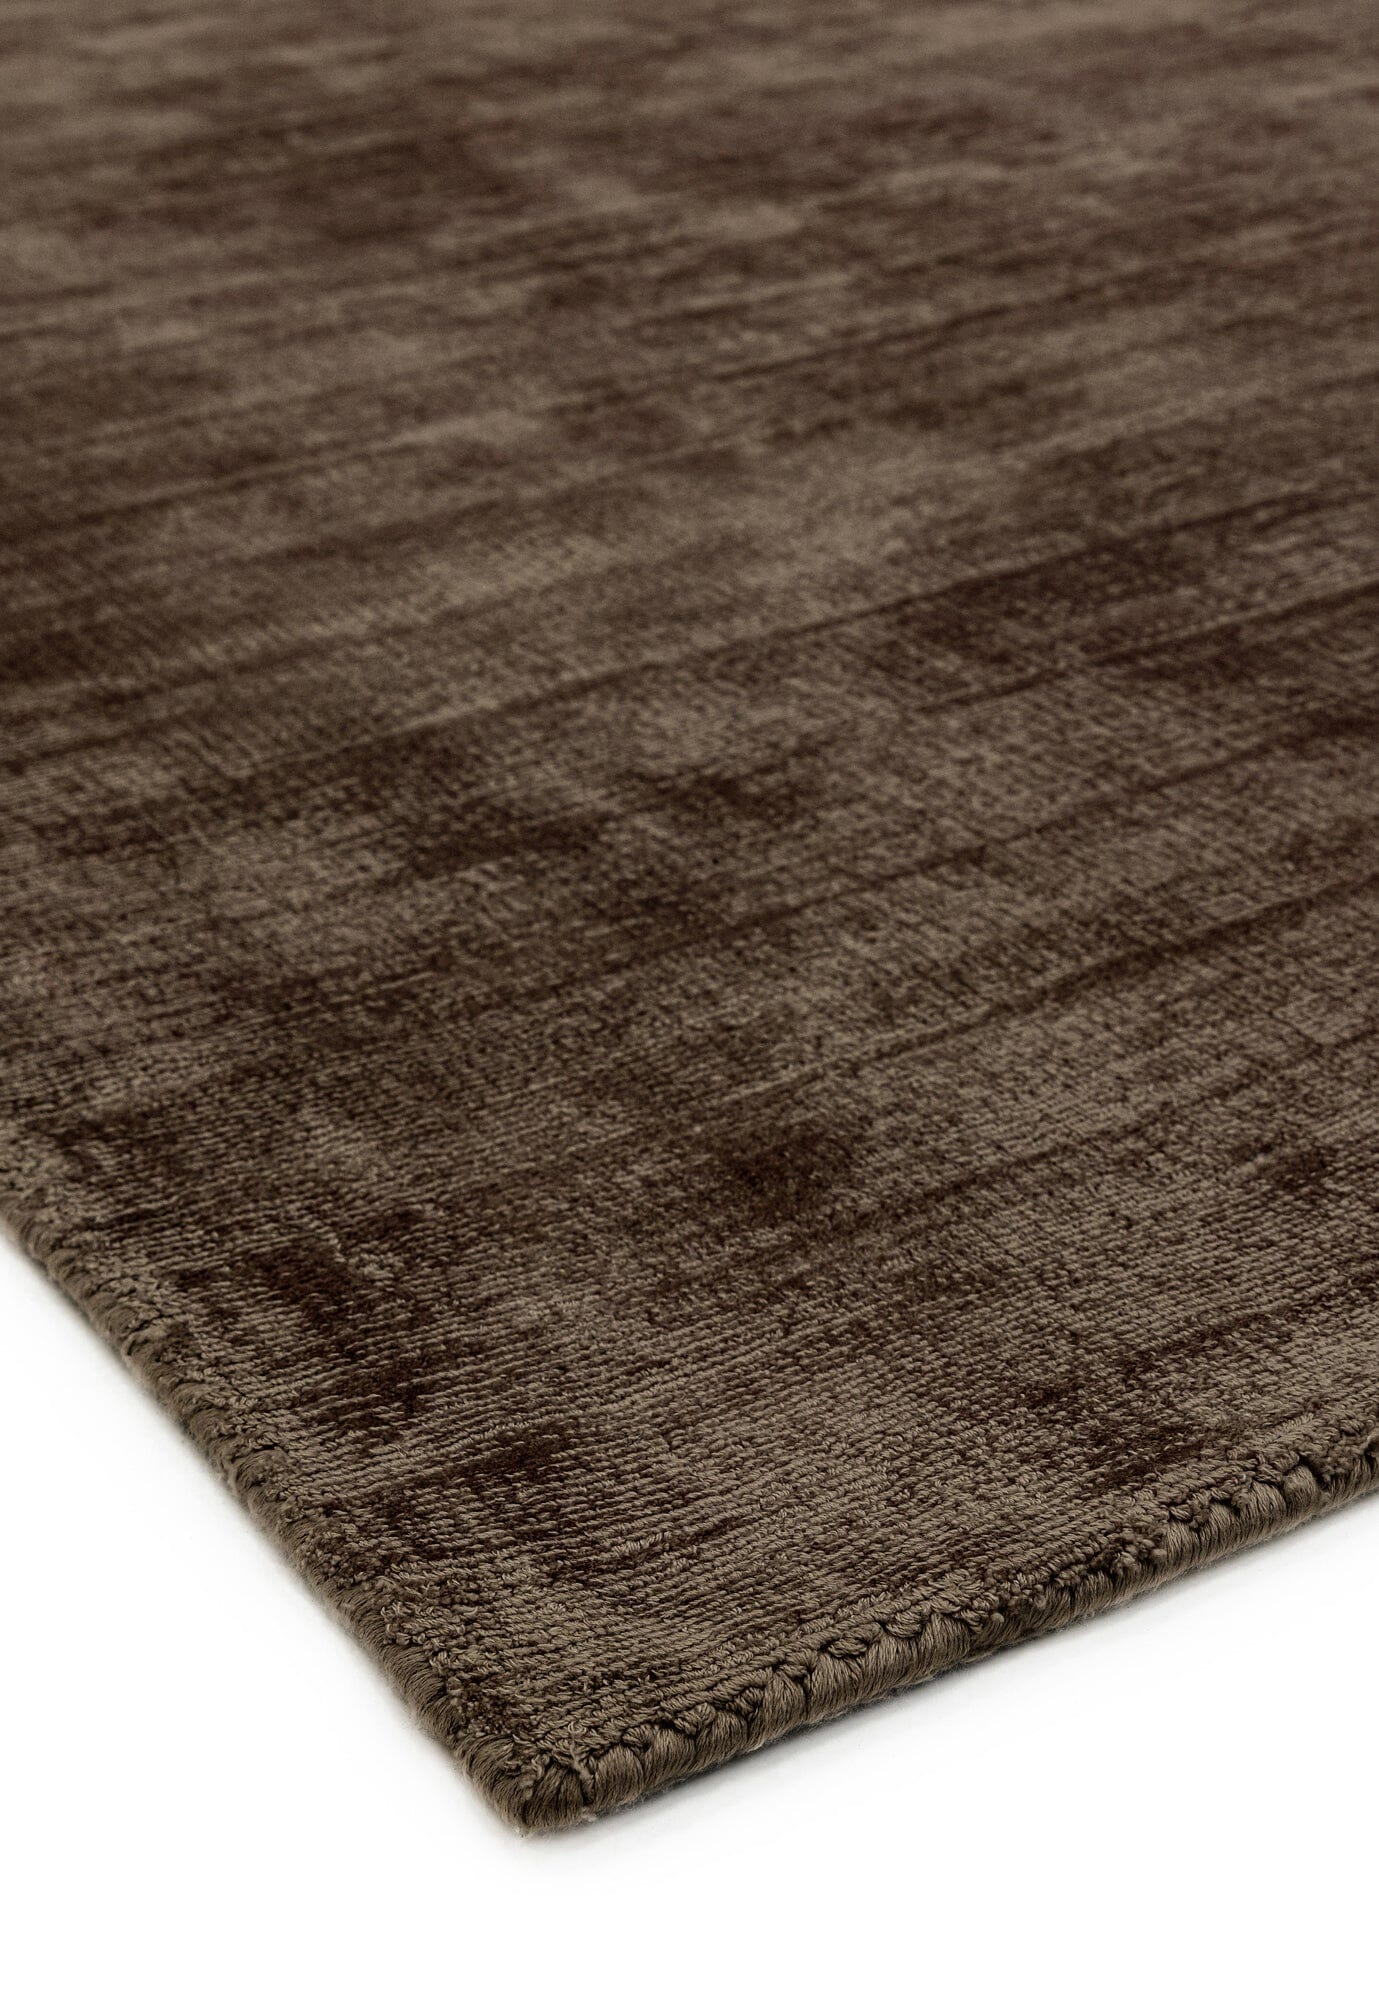 Asiatic Carpets Blade Hand Woven Rug Chocolate - 120 x 170cm